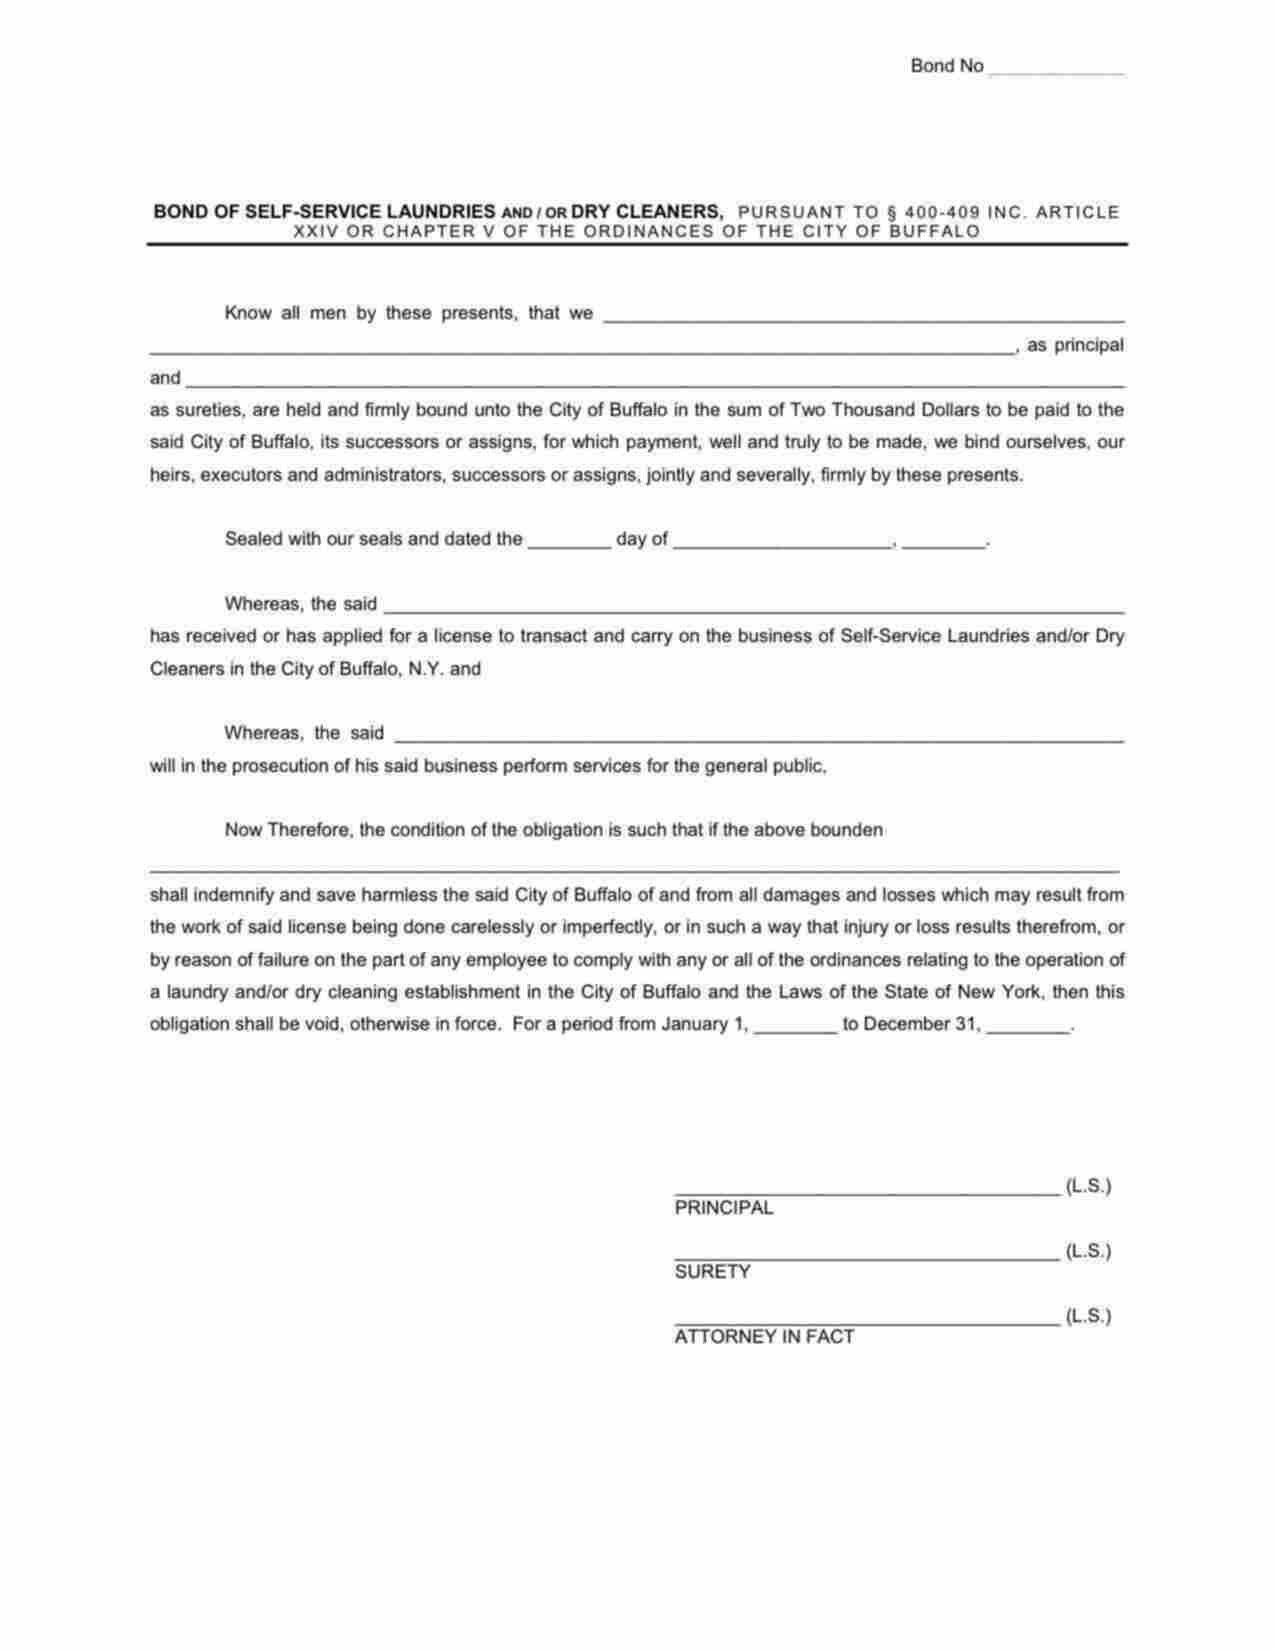 New York Self Service Laundries and/or Dry Cleaners Bond Form